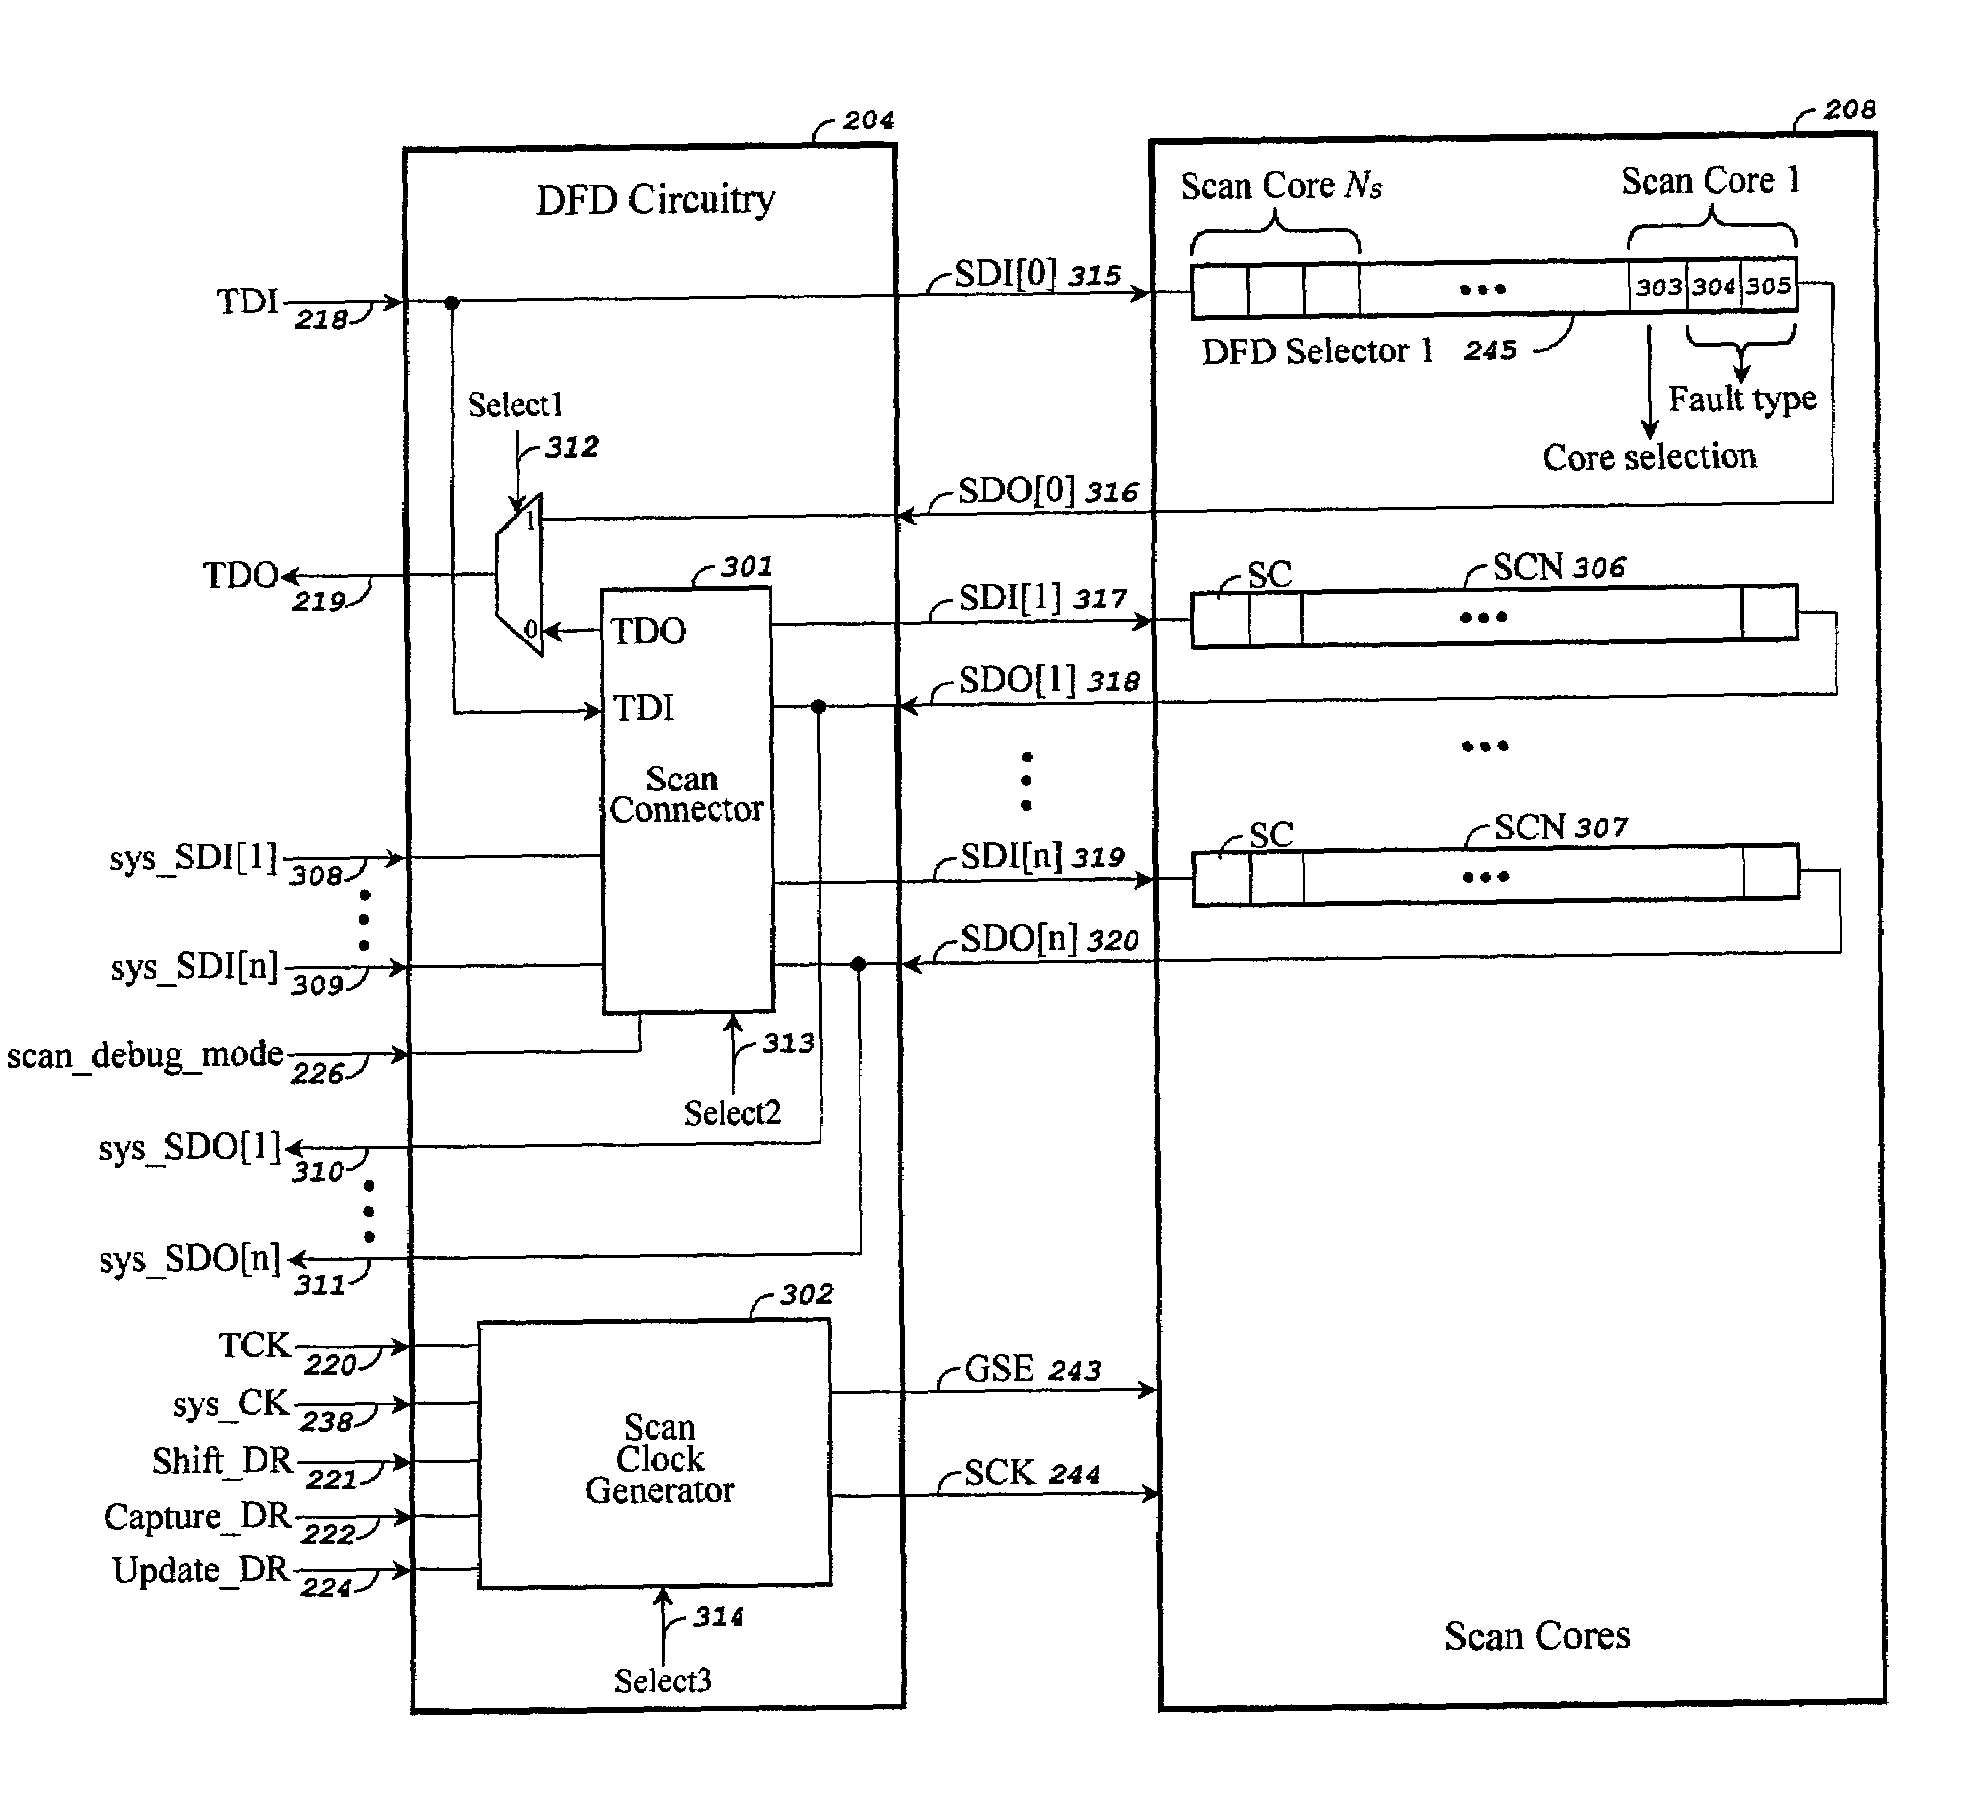 Method and apparatus for diagnosing failures in an integrated circuit using design-for-debug (DFD) techniques